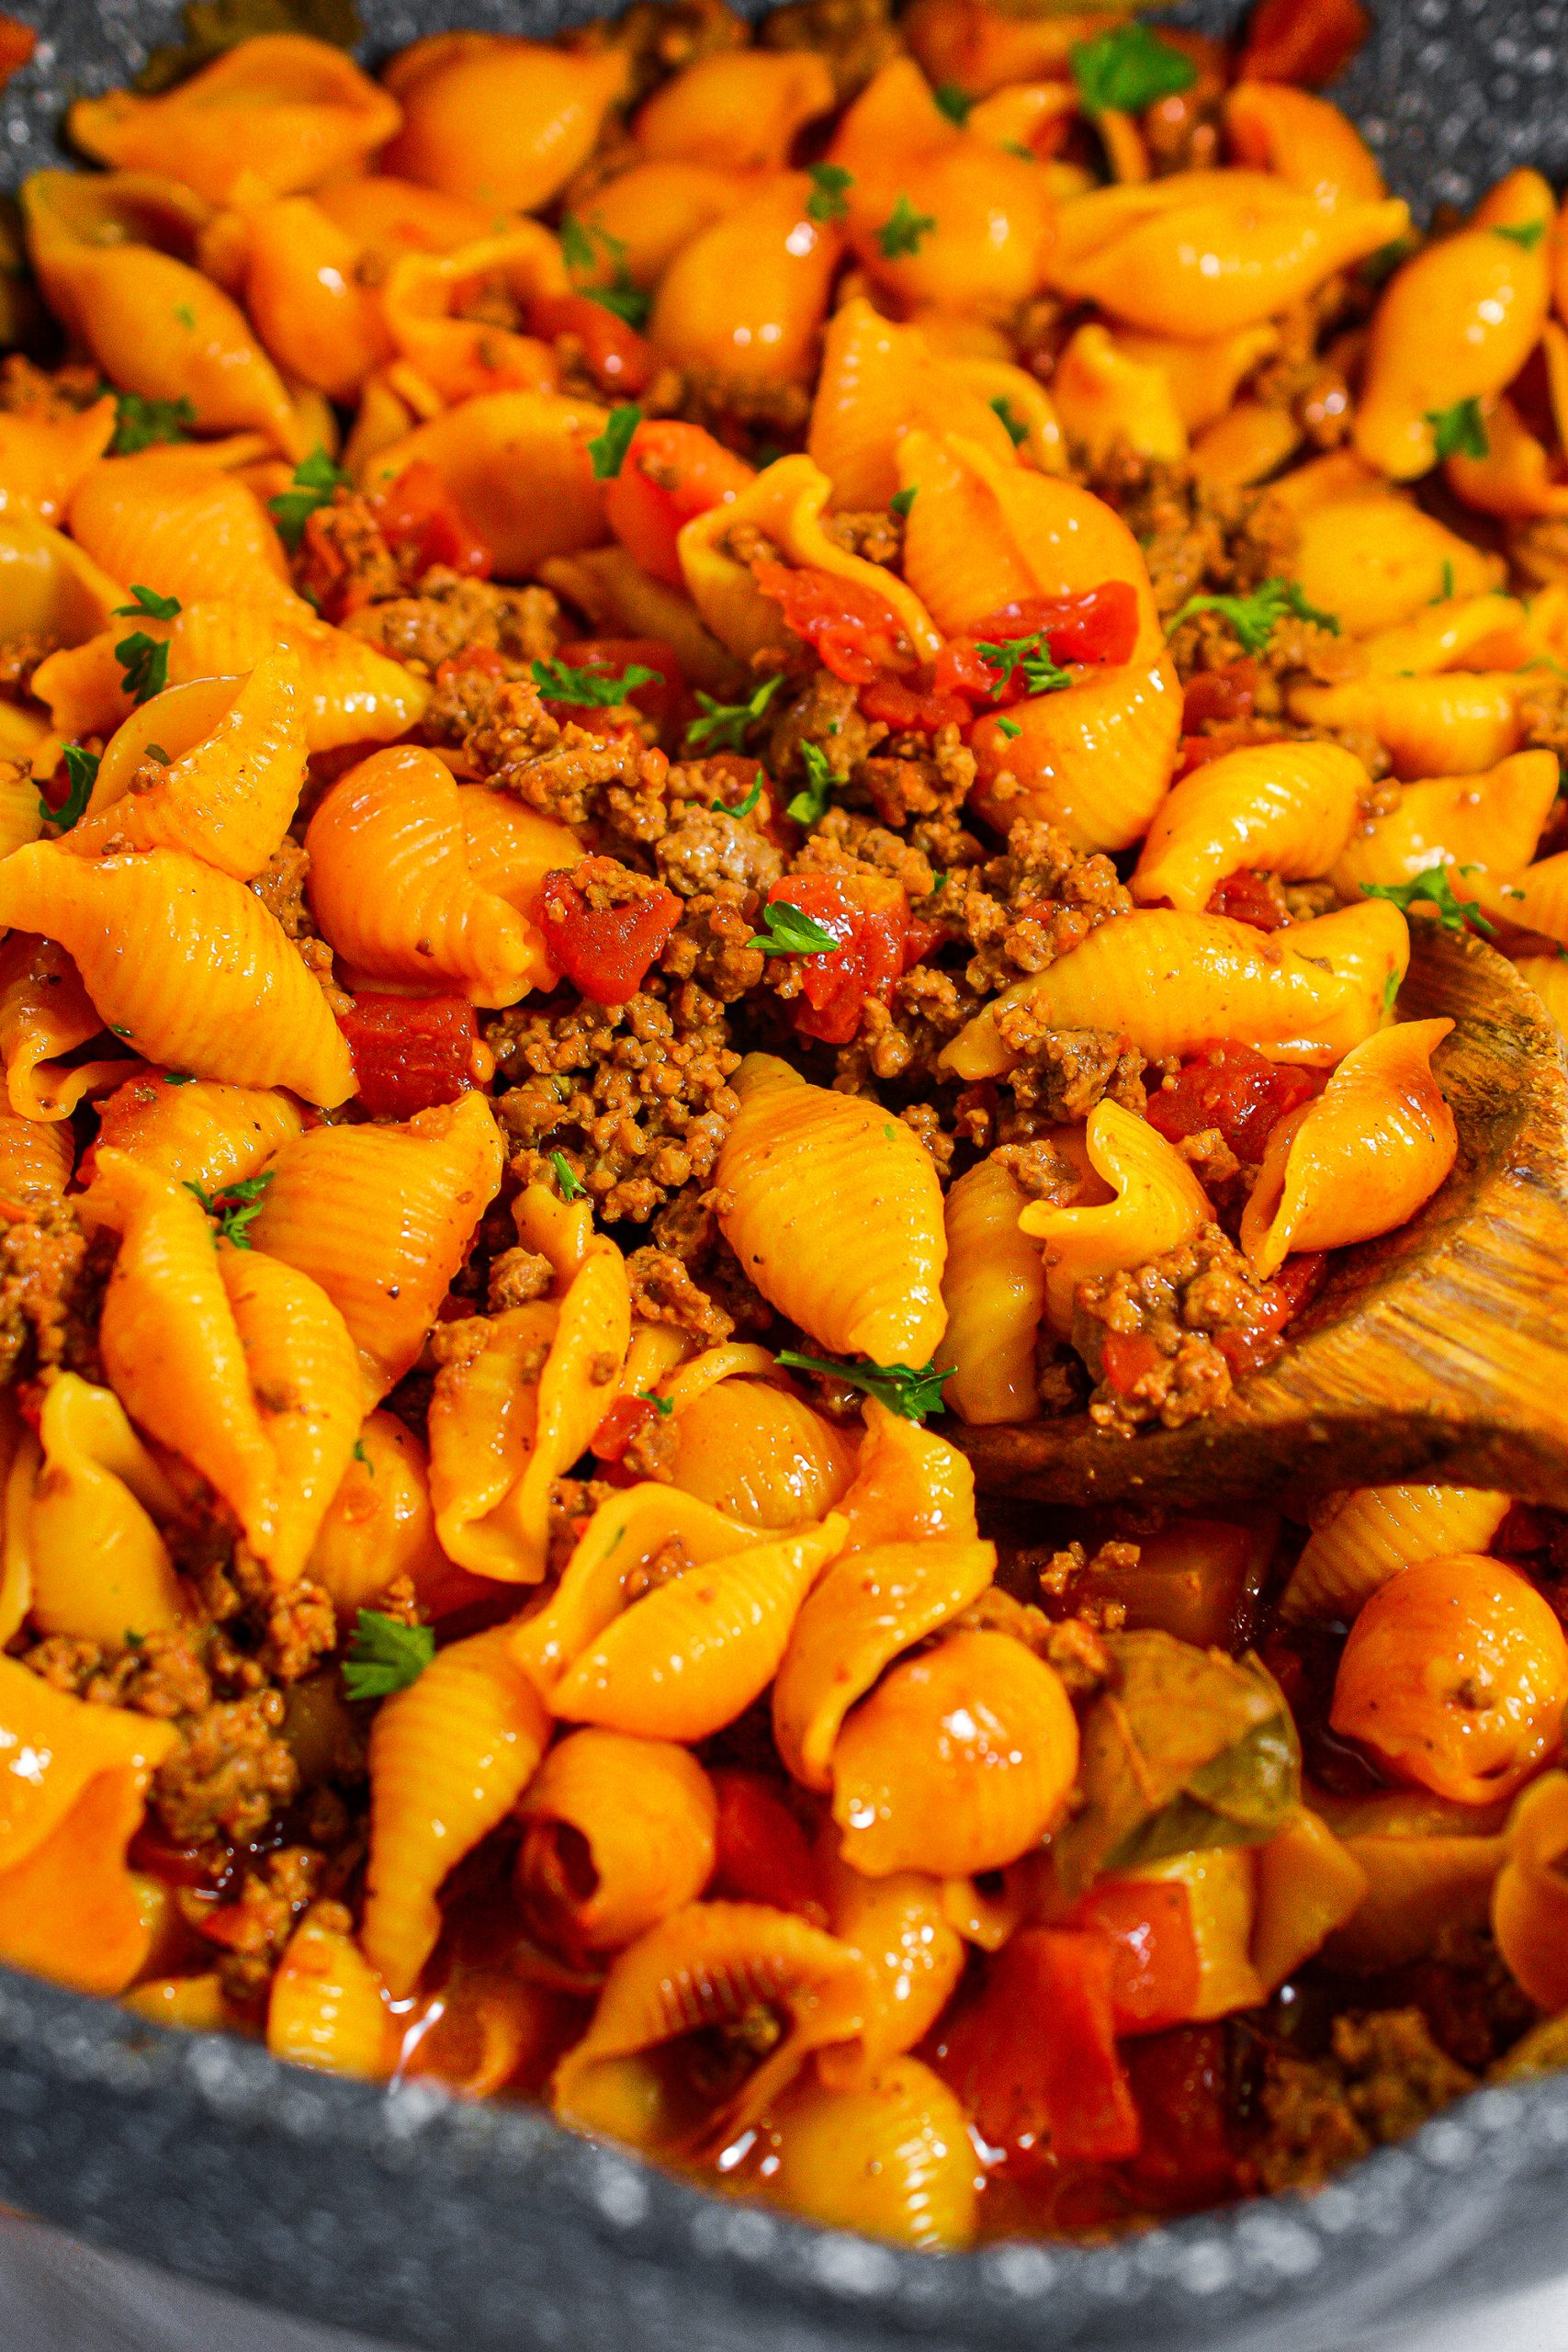 Pasta Shells with Ground Beef